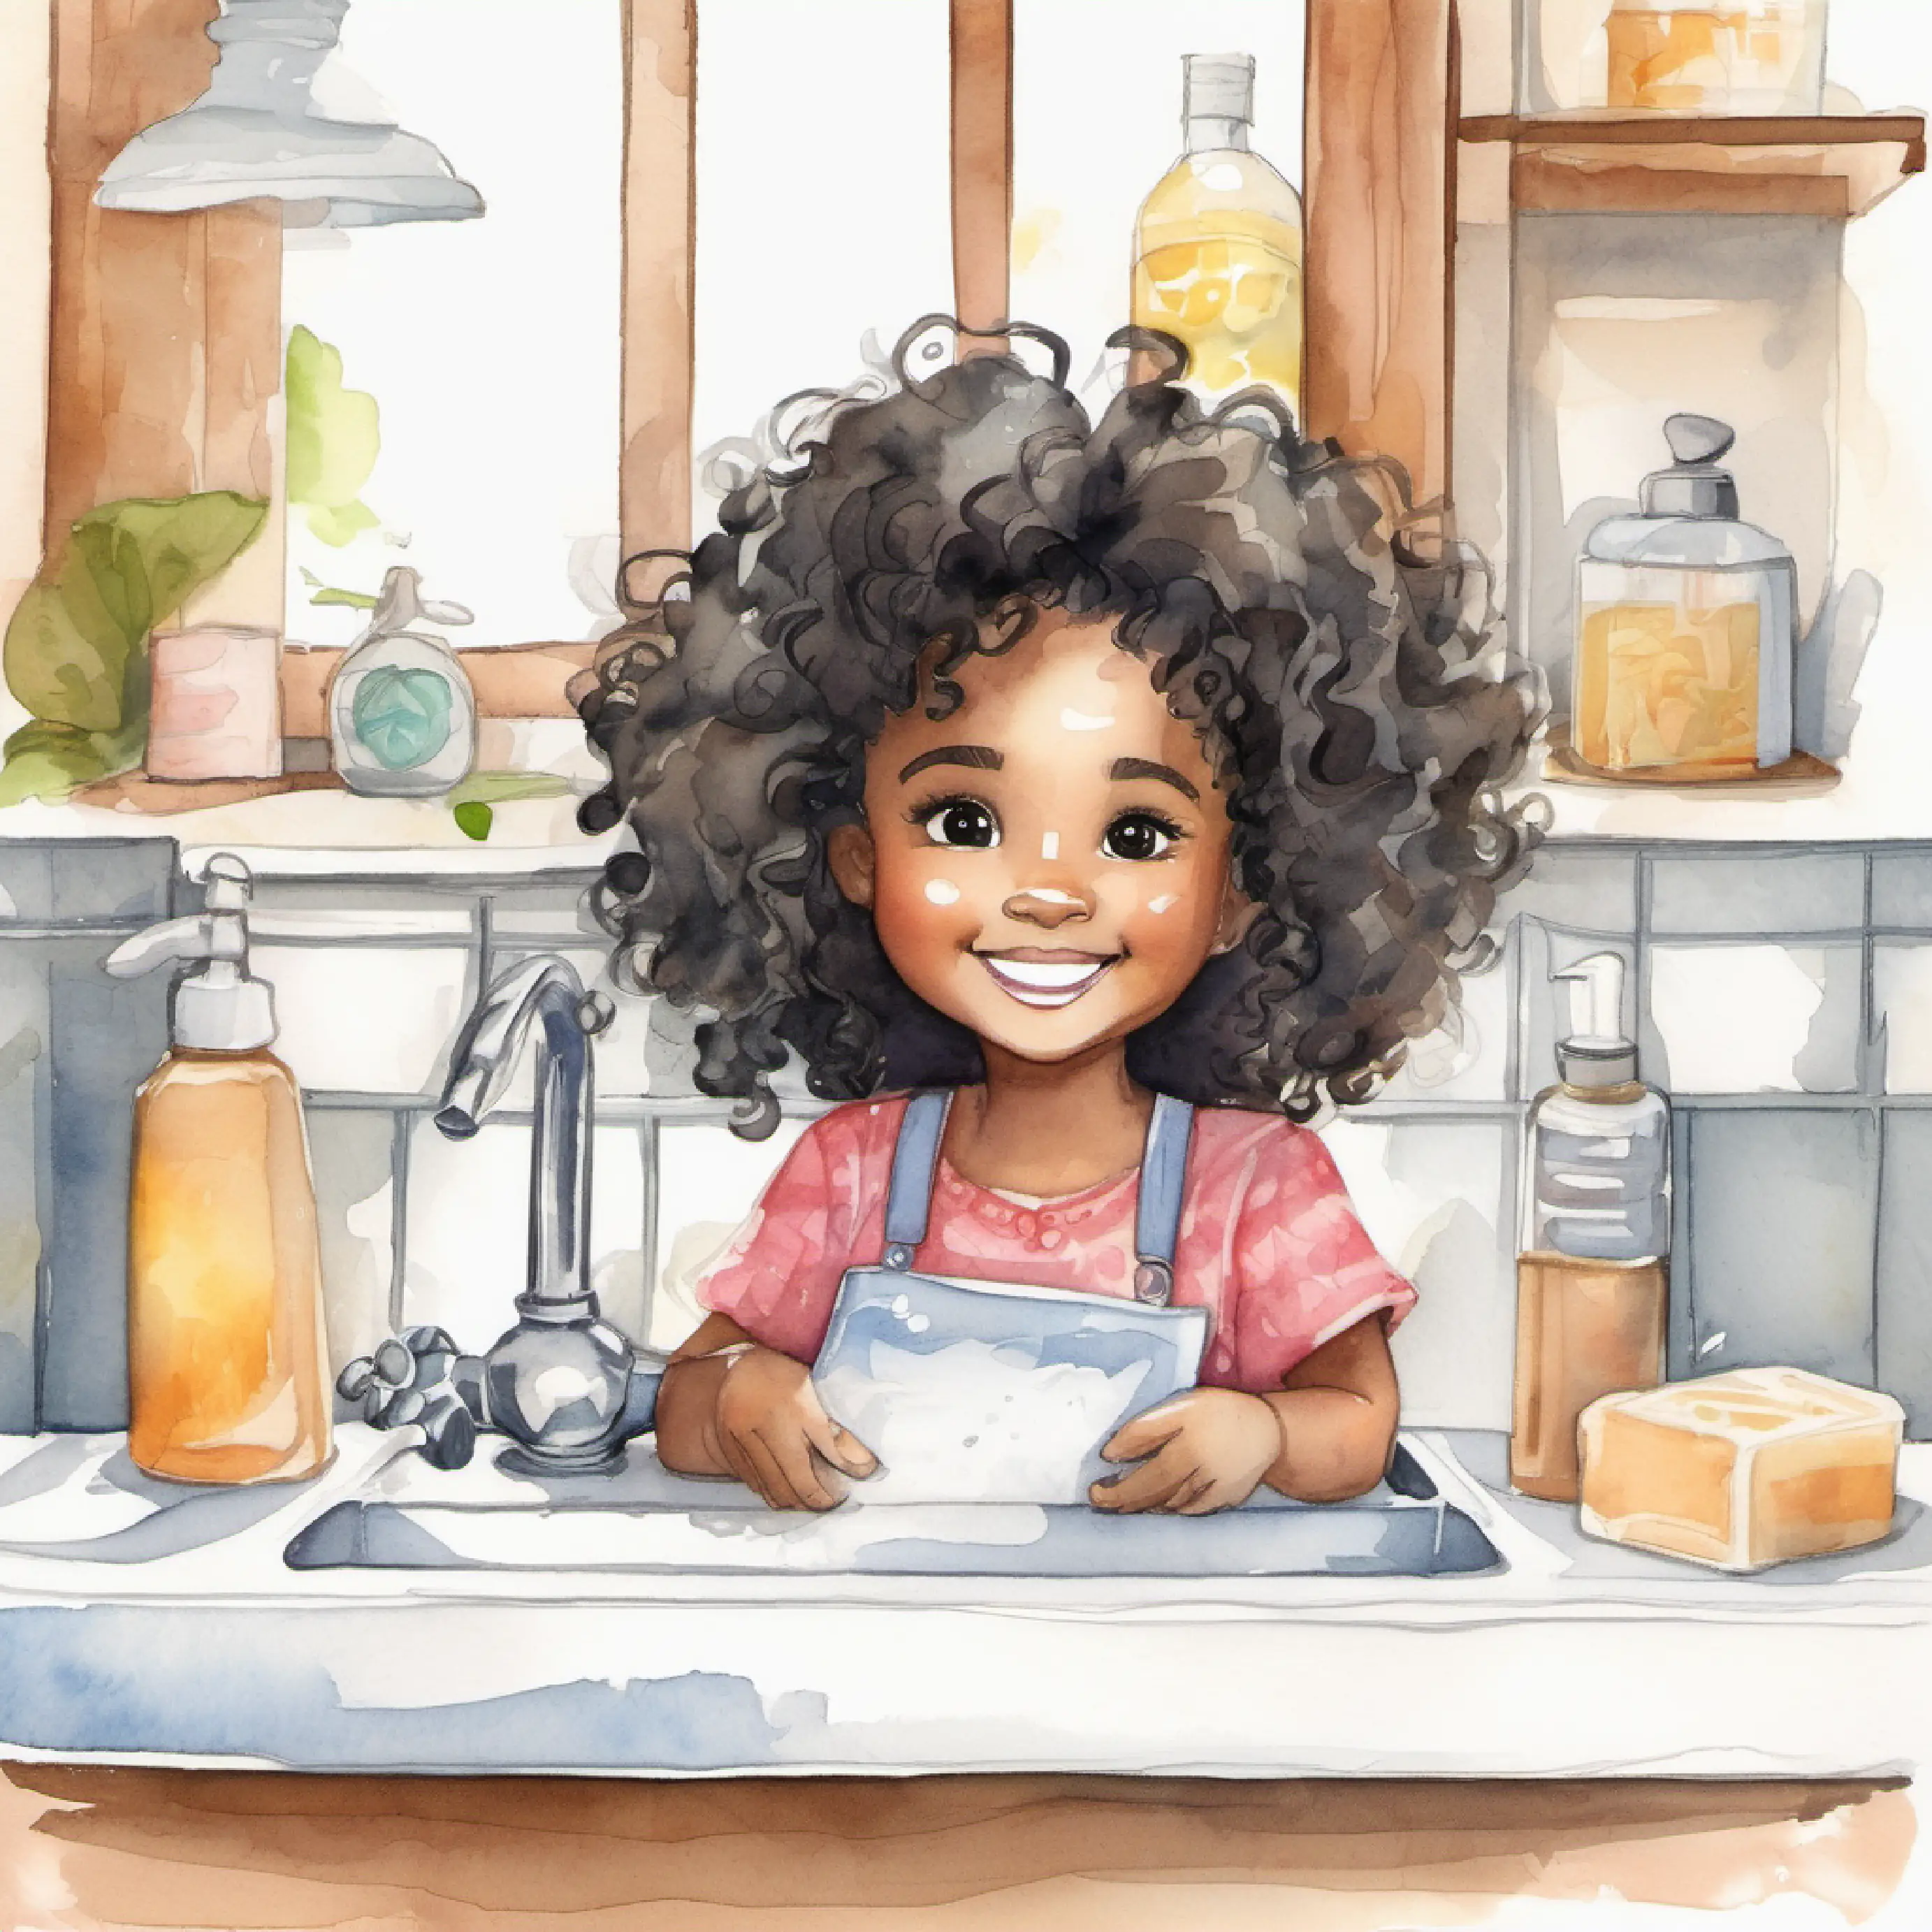 Cheerful girl, brown skin, curly black hair, big brown eyes at the sink, soap bar untouched.